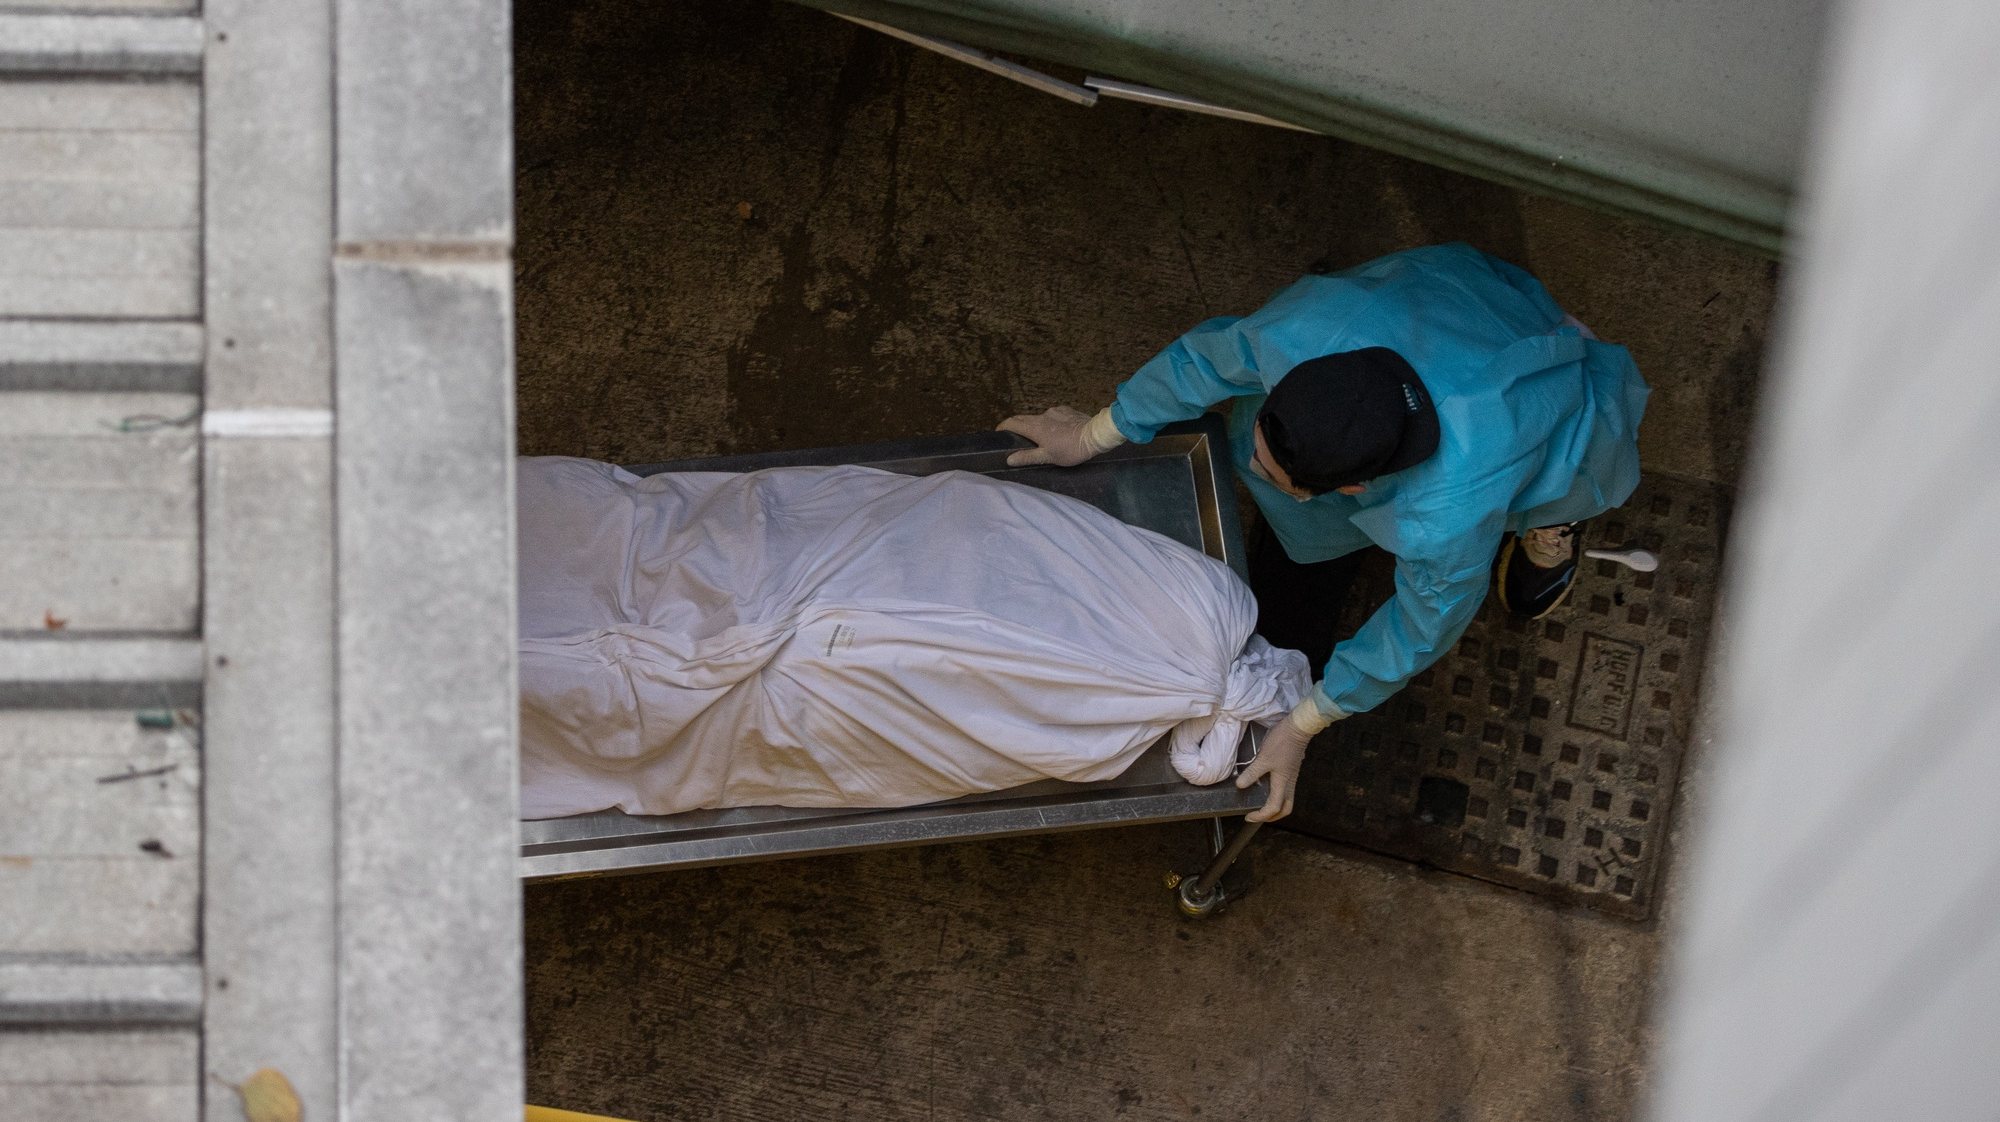 epa09796227 Funeral home staff load a dead body into a van outside the Caritas Medical Center in Hong Kong, China, 02 March 2022. Hong Kong health authorities said large freezer containers will be set up at public hospitals to store dead bodies as mortuaries are reaching capacity. A makeshift hospital is under construction in Hong Kong as the Omicron variant has brought the regionâ€™s public health system close to collapsing, with patients lying in beds placed outside health facilities.  EPA/JEROME FAVRE